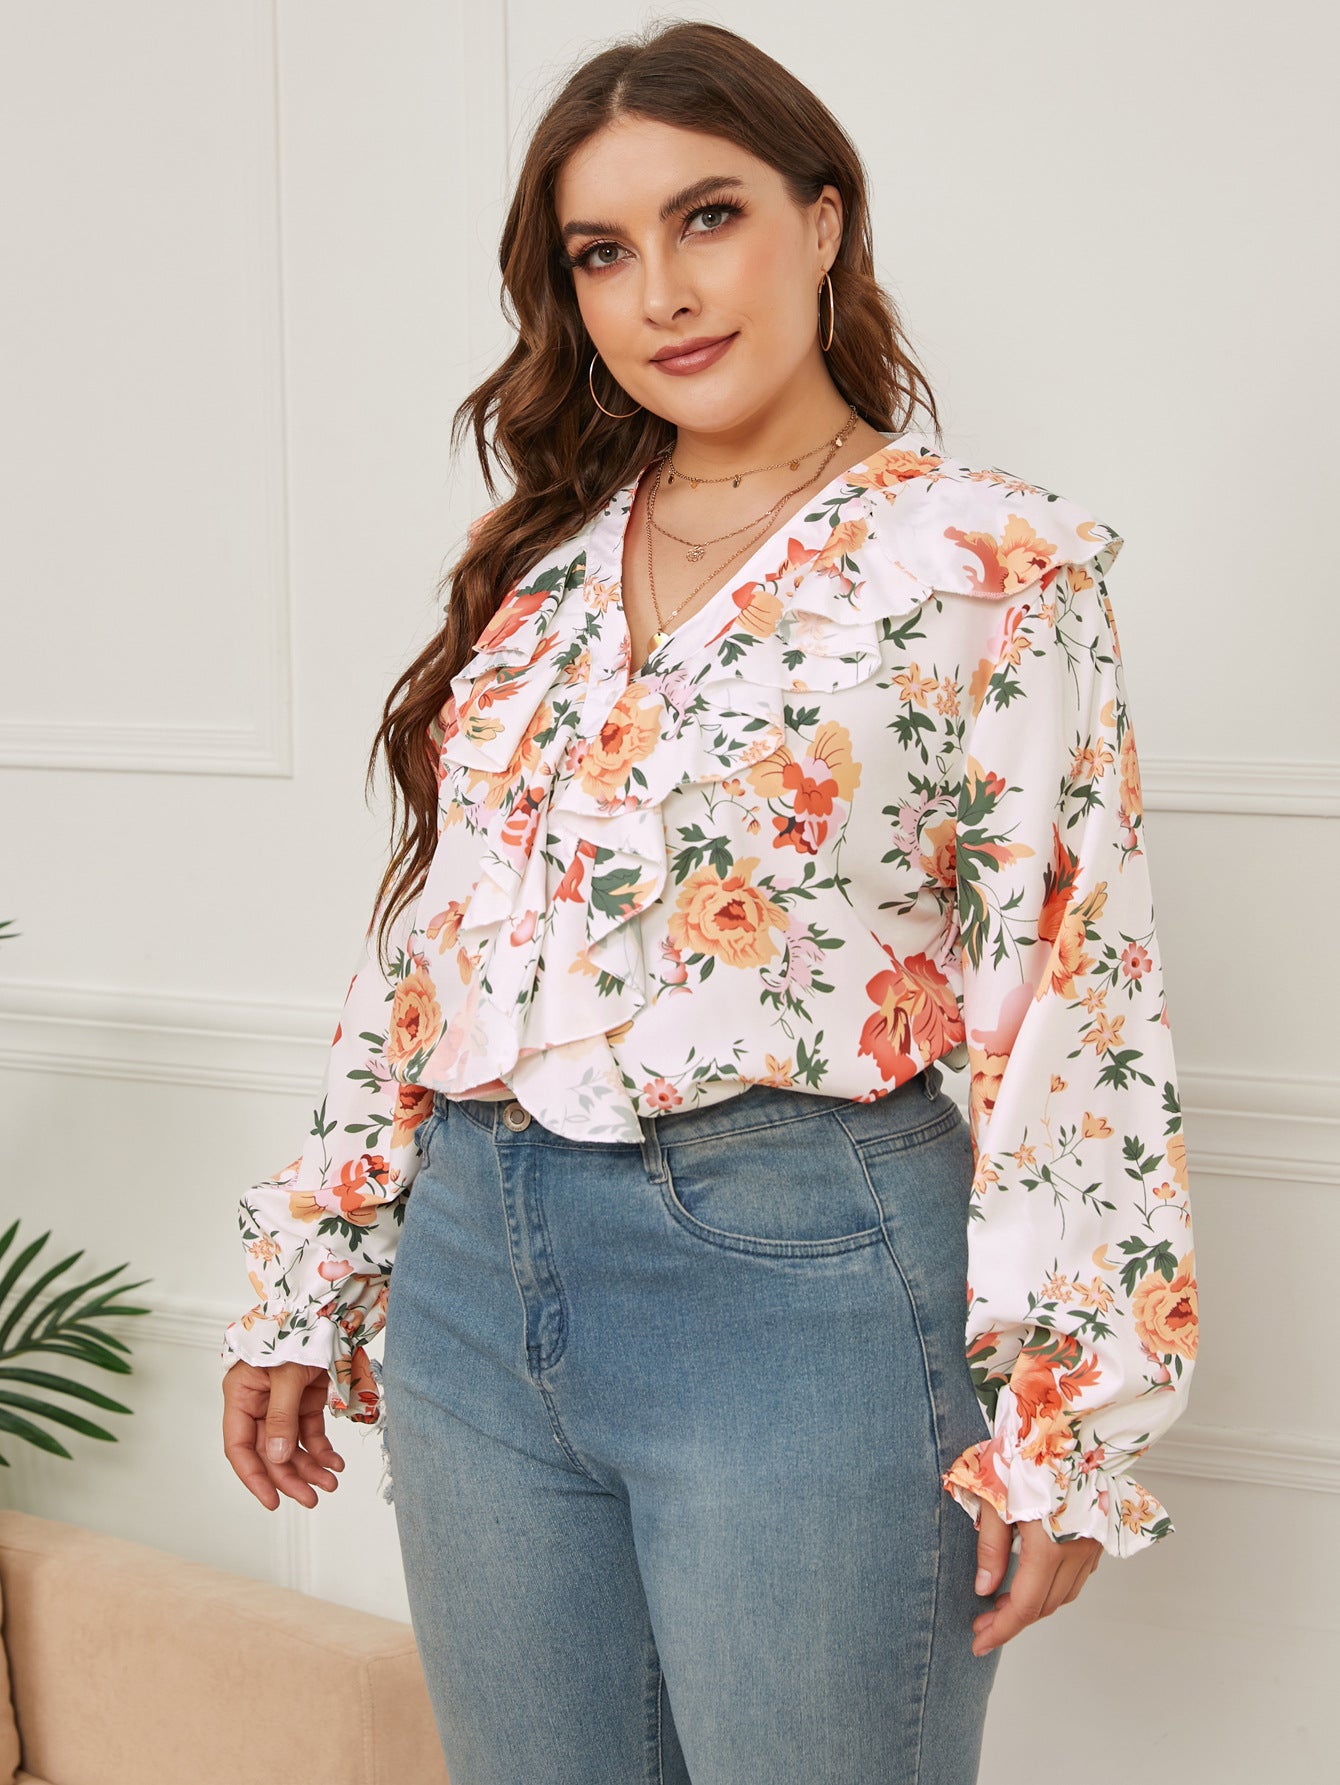 Plus Size Women's Printed Ruffled Loose V-neck Top  Tops Thecurvestory